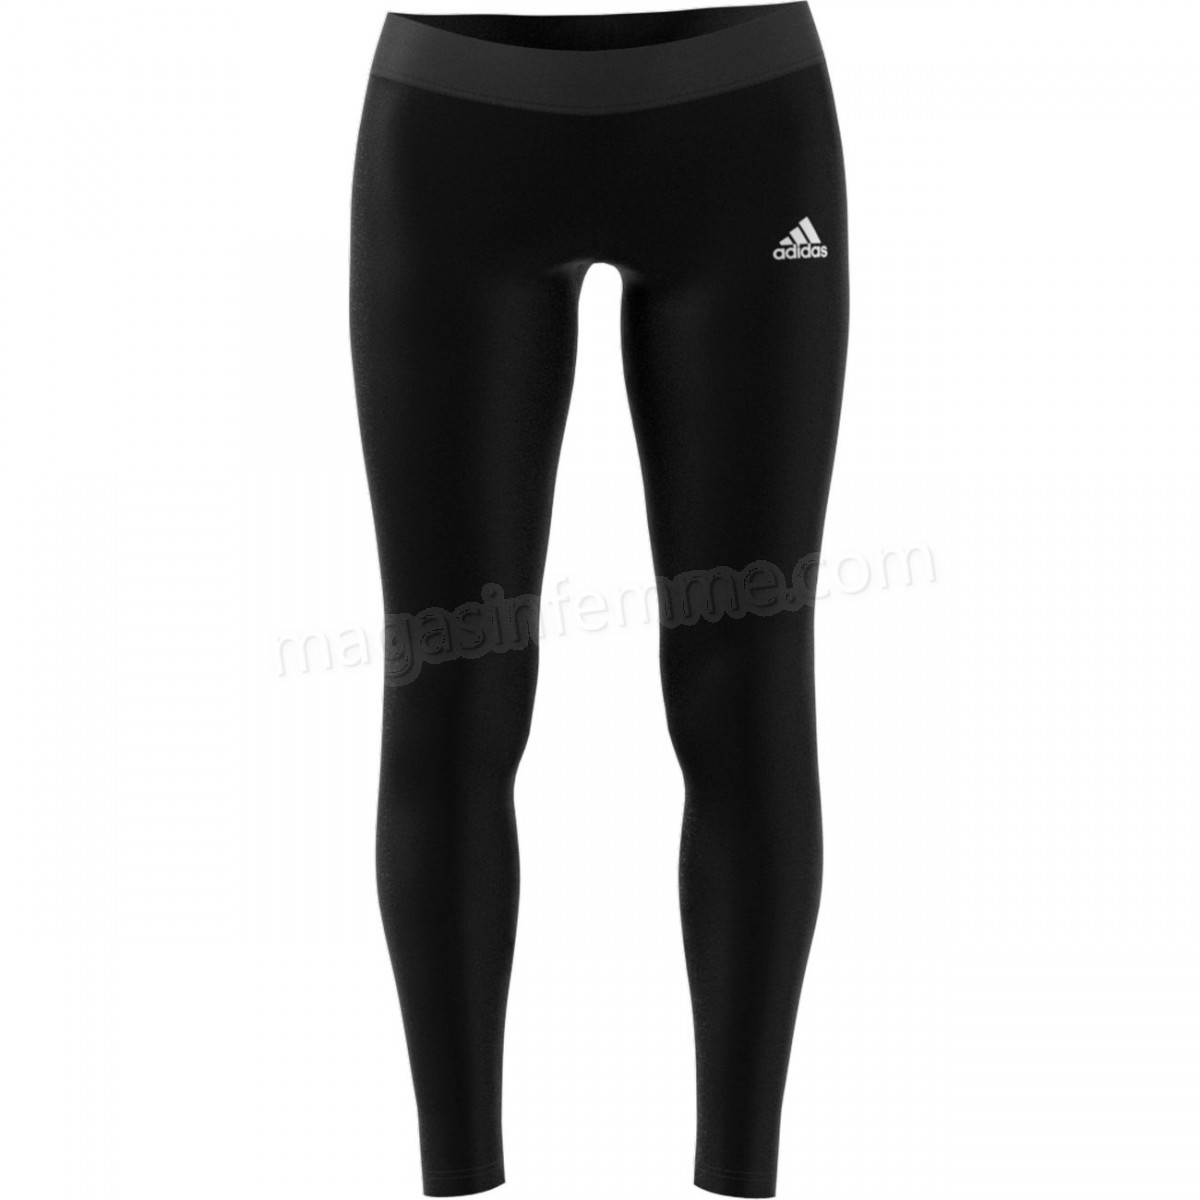 Adidas-Fitness femme ADIDAS Collant femme adidas Must Haves 3-Stripes en solde - -10